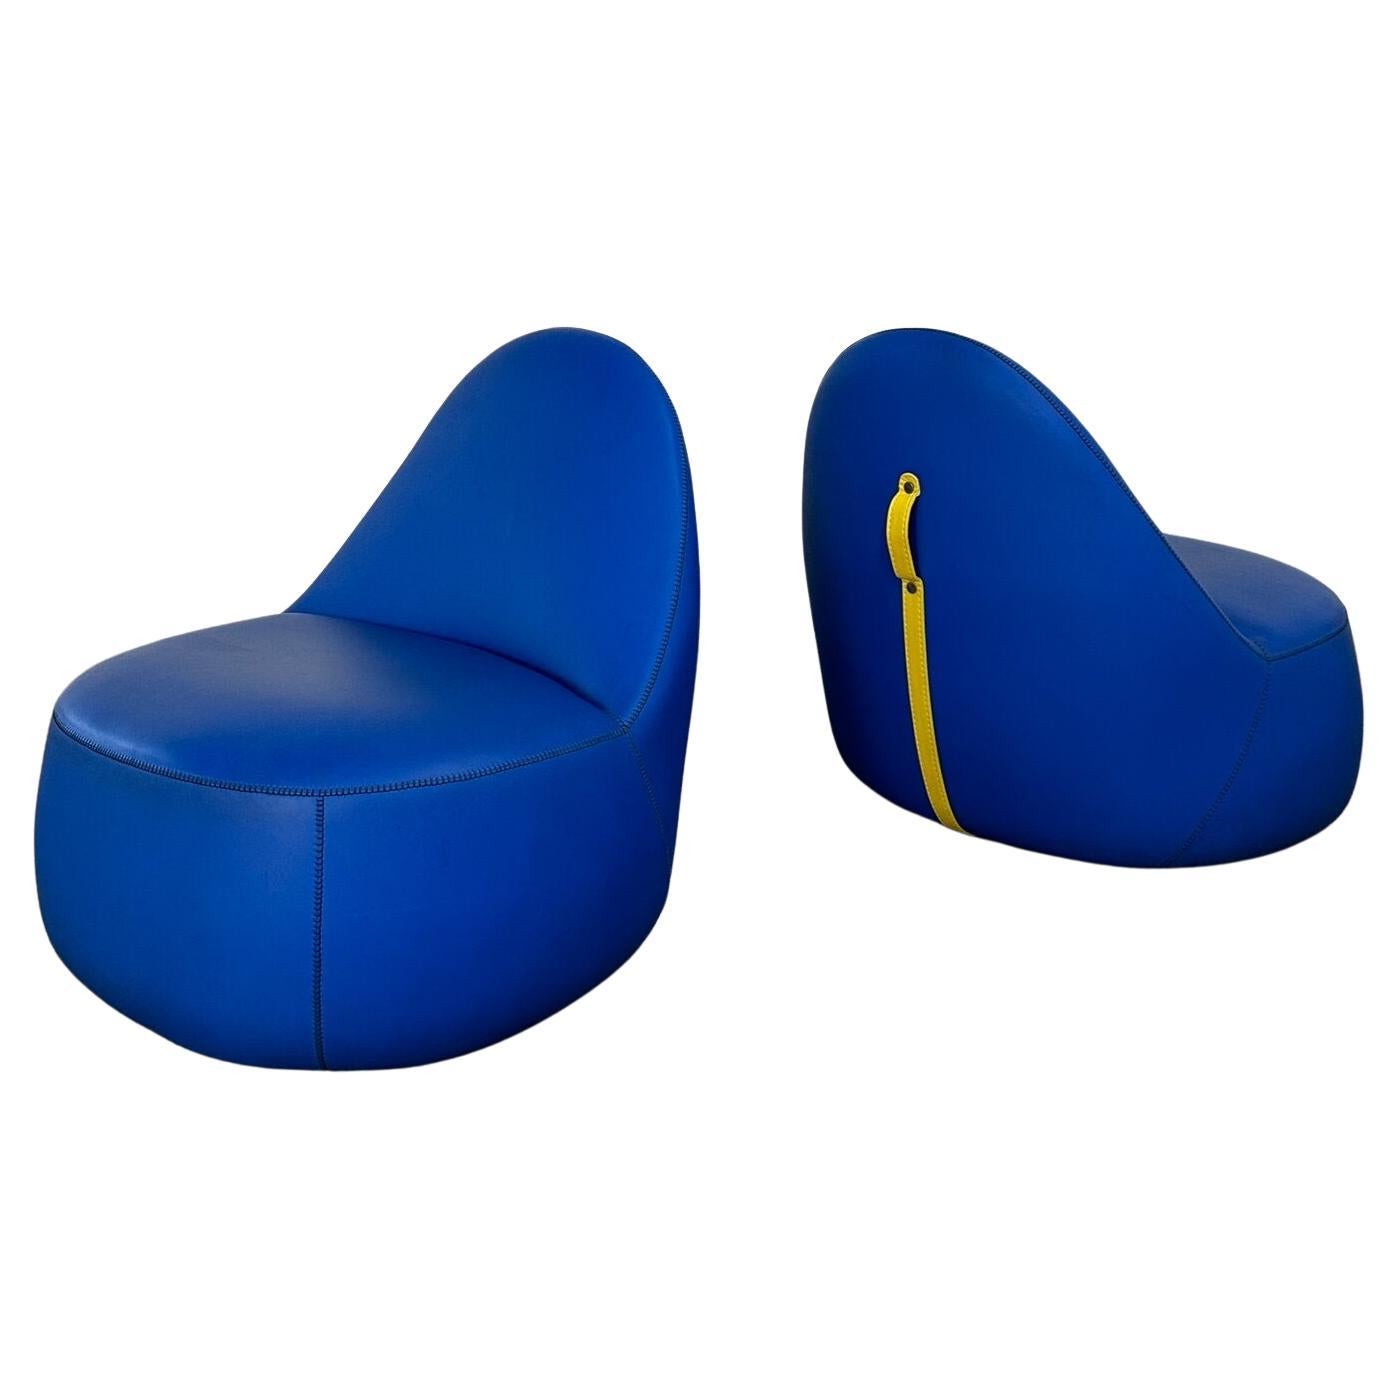 Mitt Lounge Chairs in Blue with Yellow Accents by Claudia + Harry Washington, Be For Sale